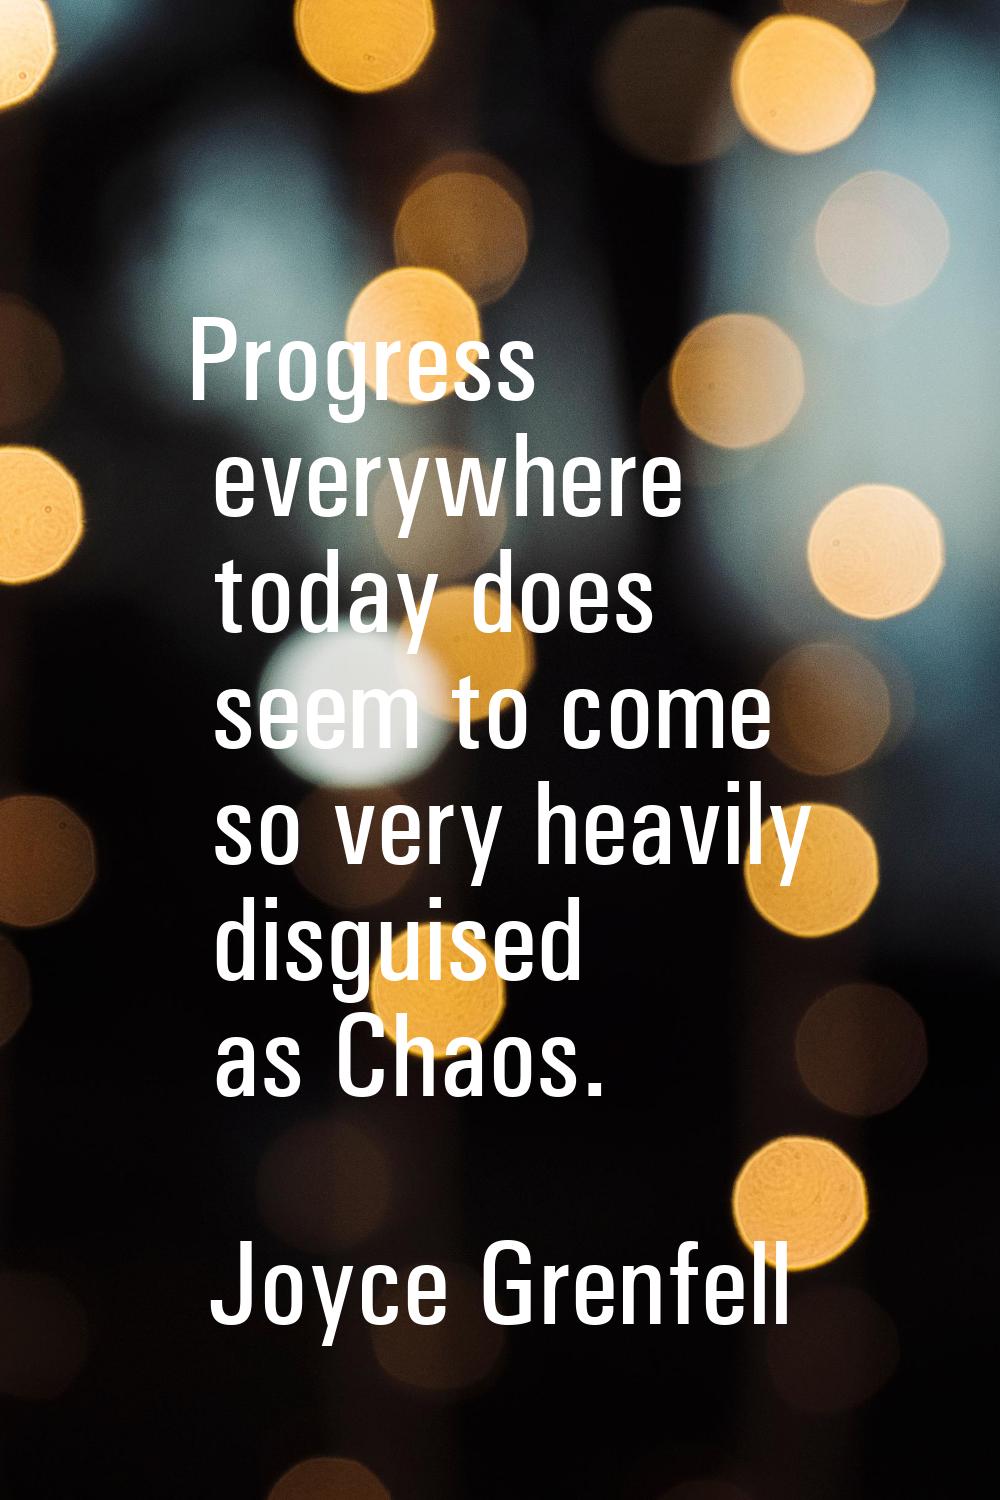 Progress everywhere today does seem to come so very heavily disguised as Chaos.